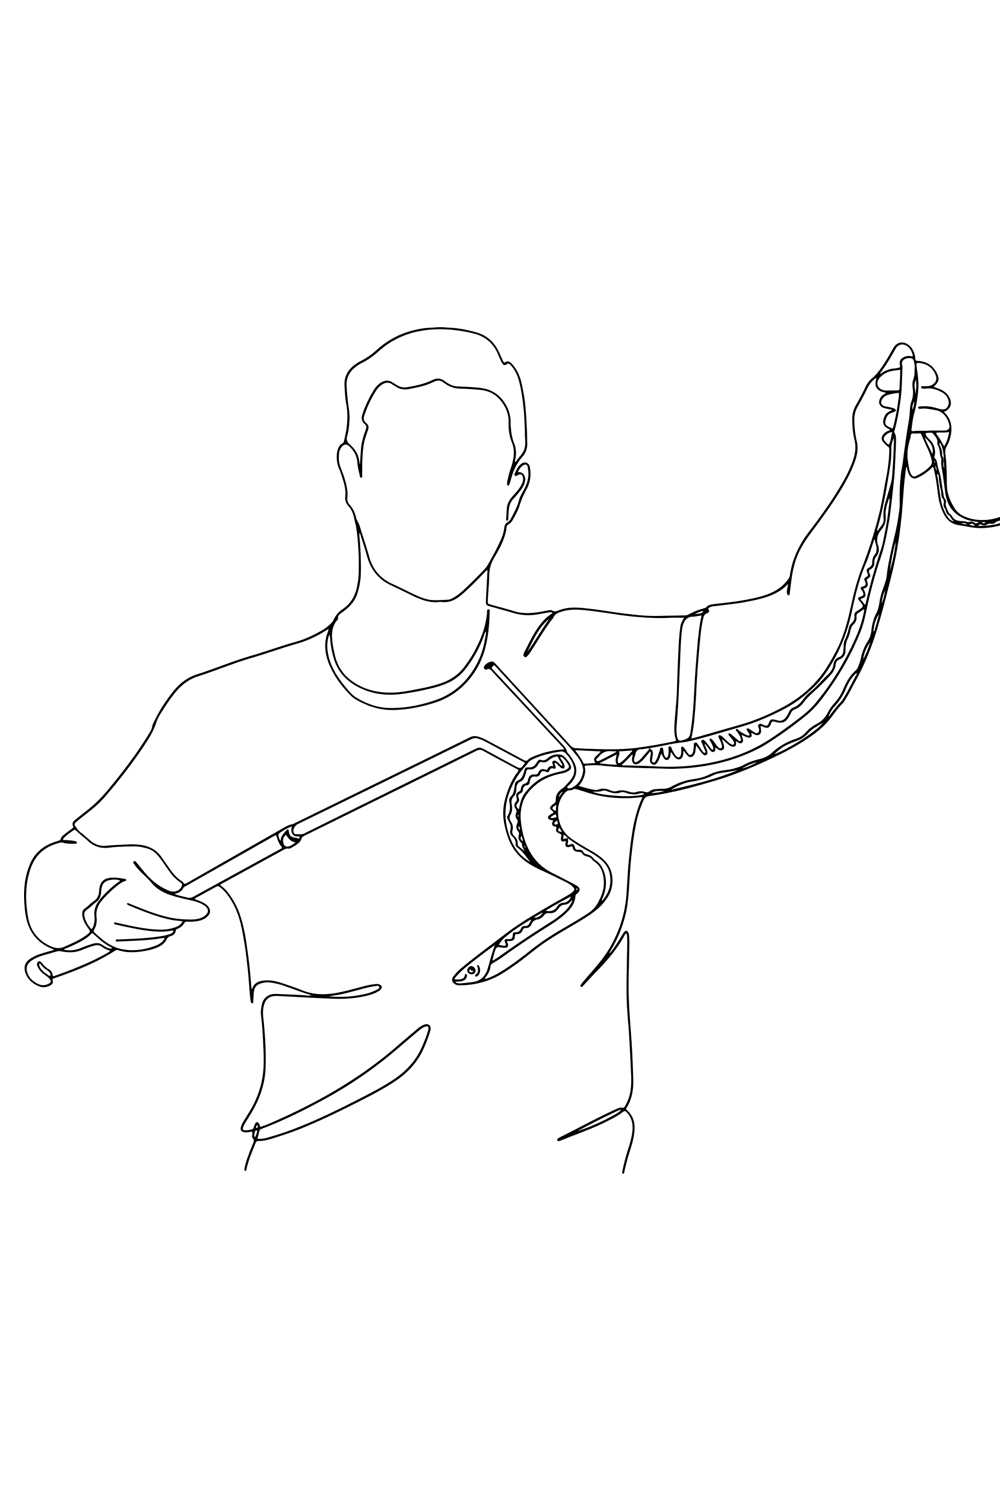 Snake Whisperer Cartoon: Professional Snake Catcher in One Line, Continuous Sketch Snake Catcher Tools: Cartoon Illustration, Professional Snake Catcher Cartoon pinterest preview image.